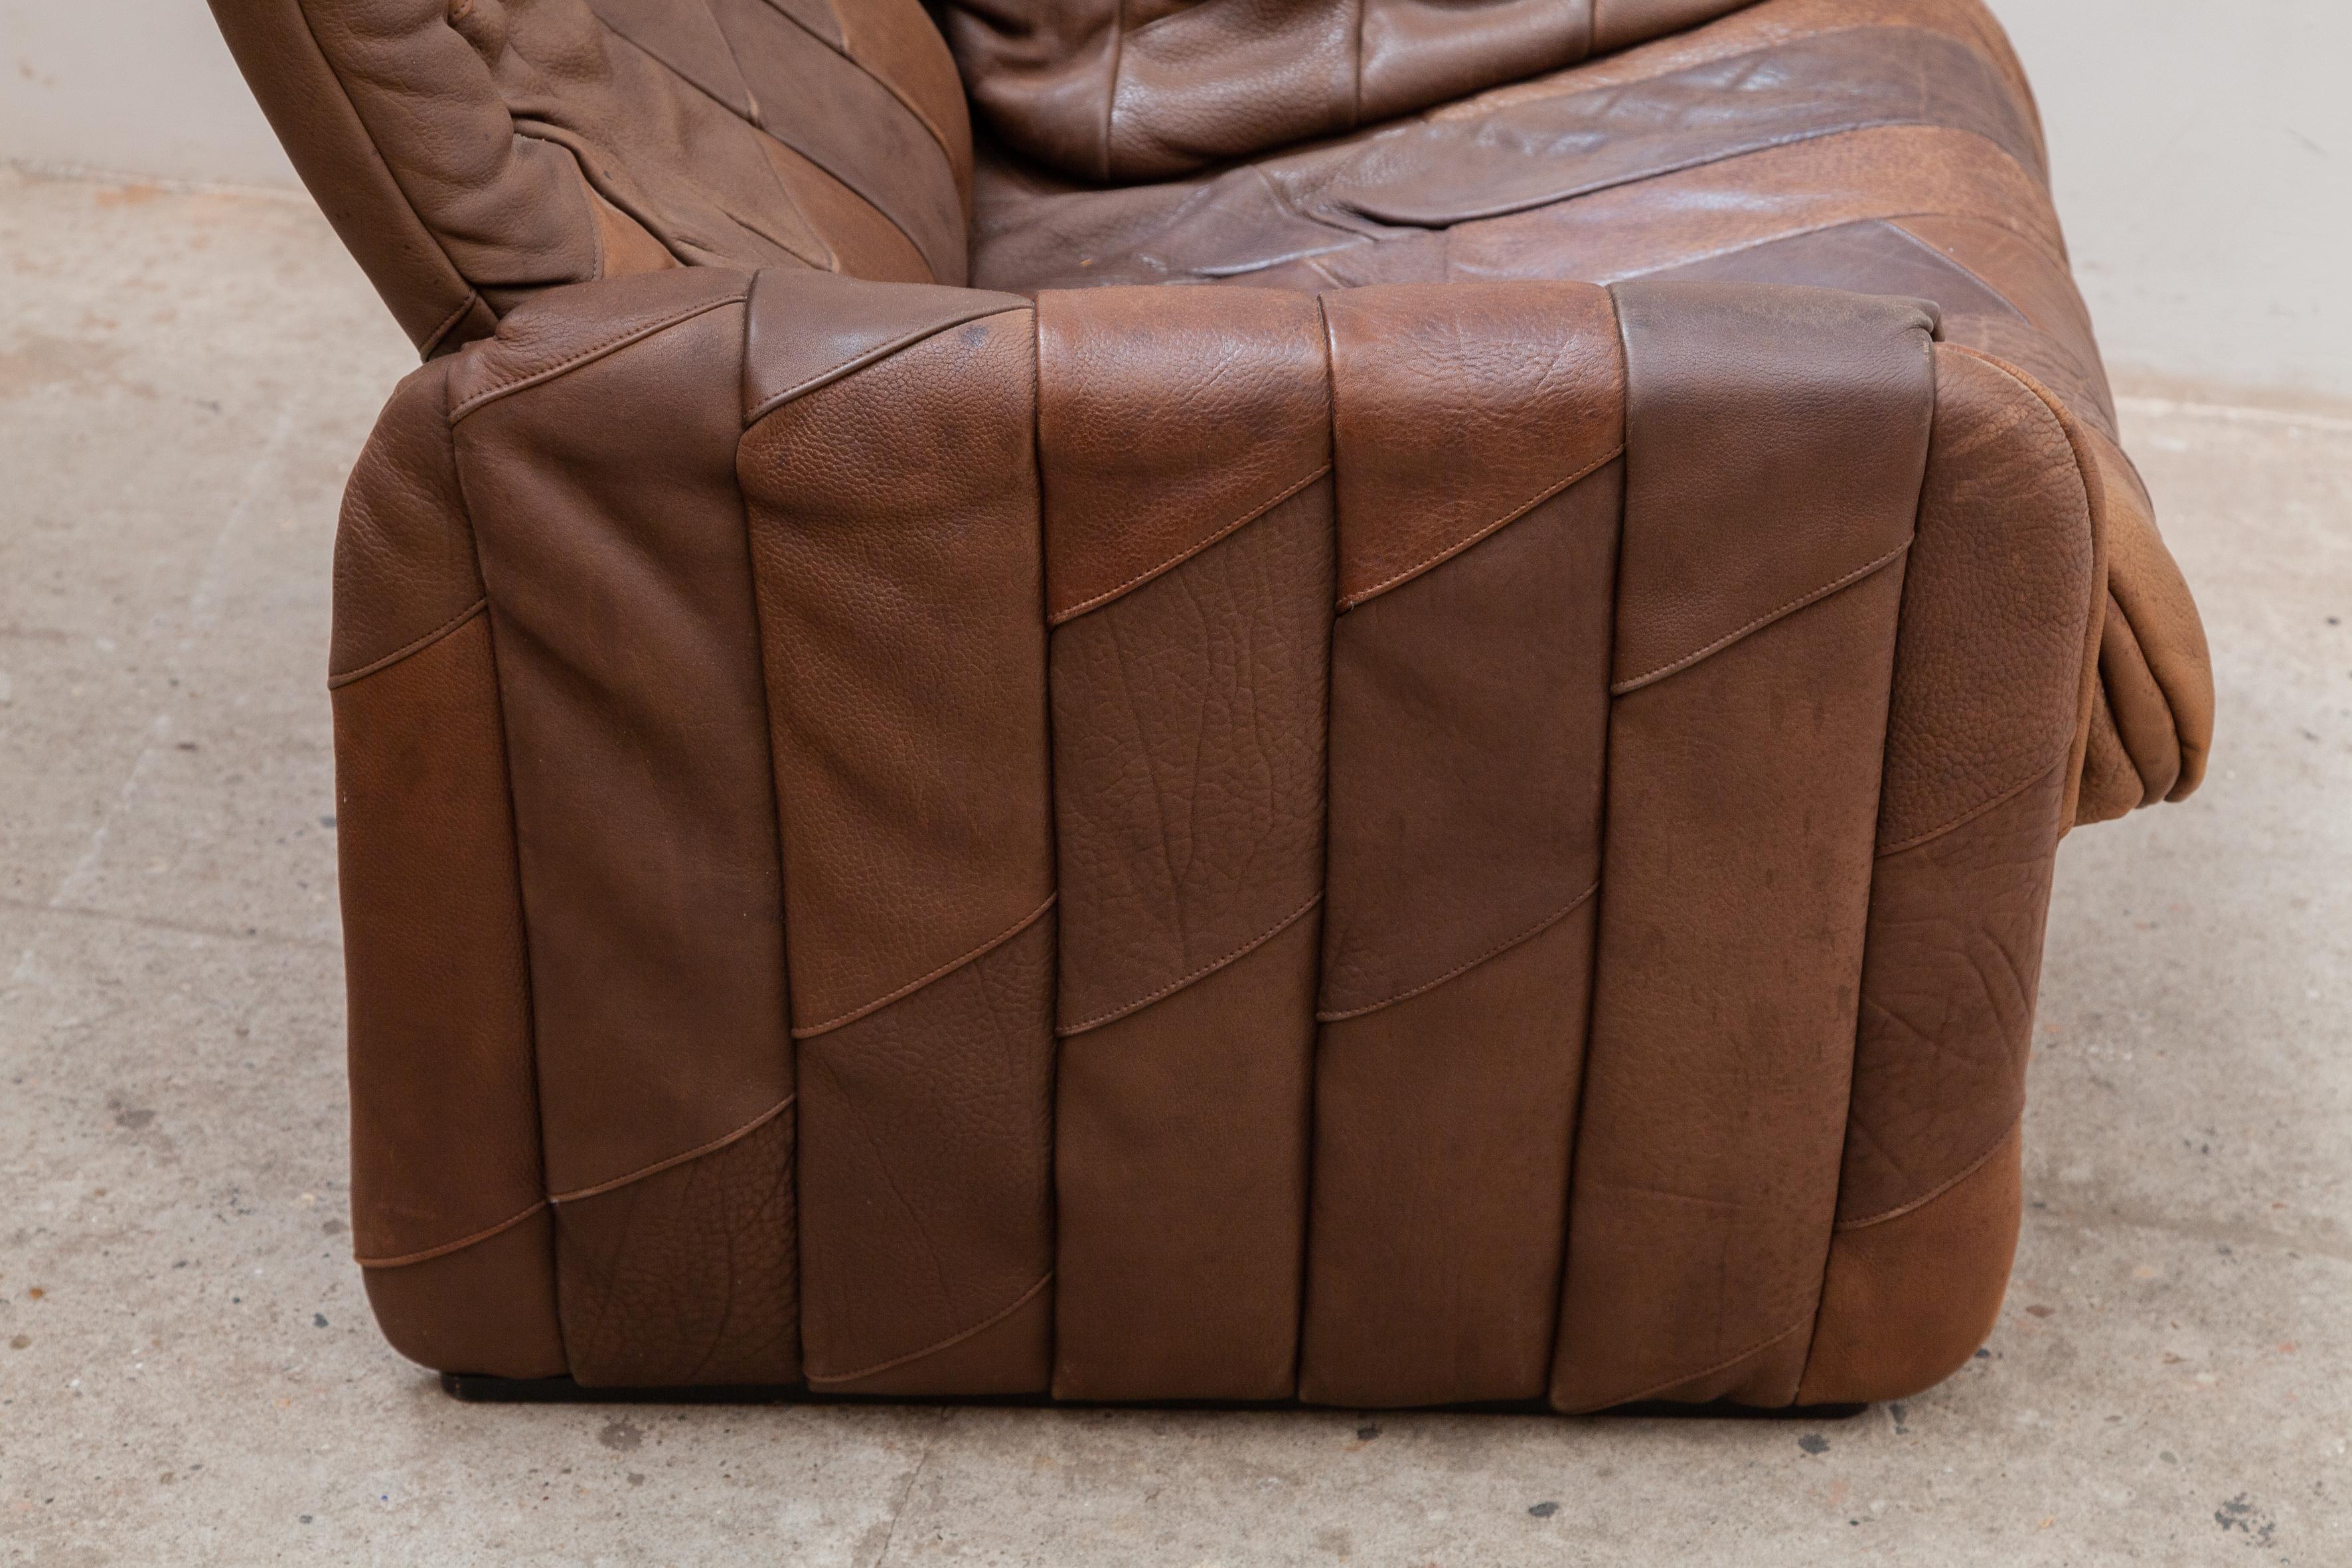 Swiss De Sede Brown Leather Patchwork Seventies Lounge Chair For Sale